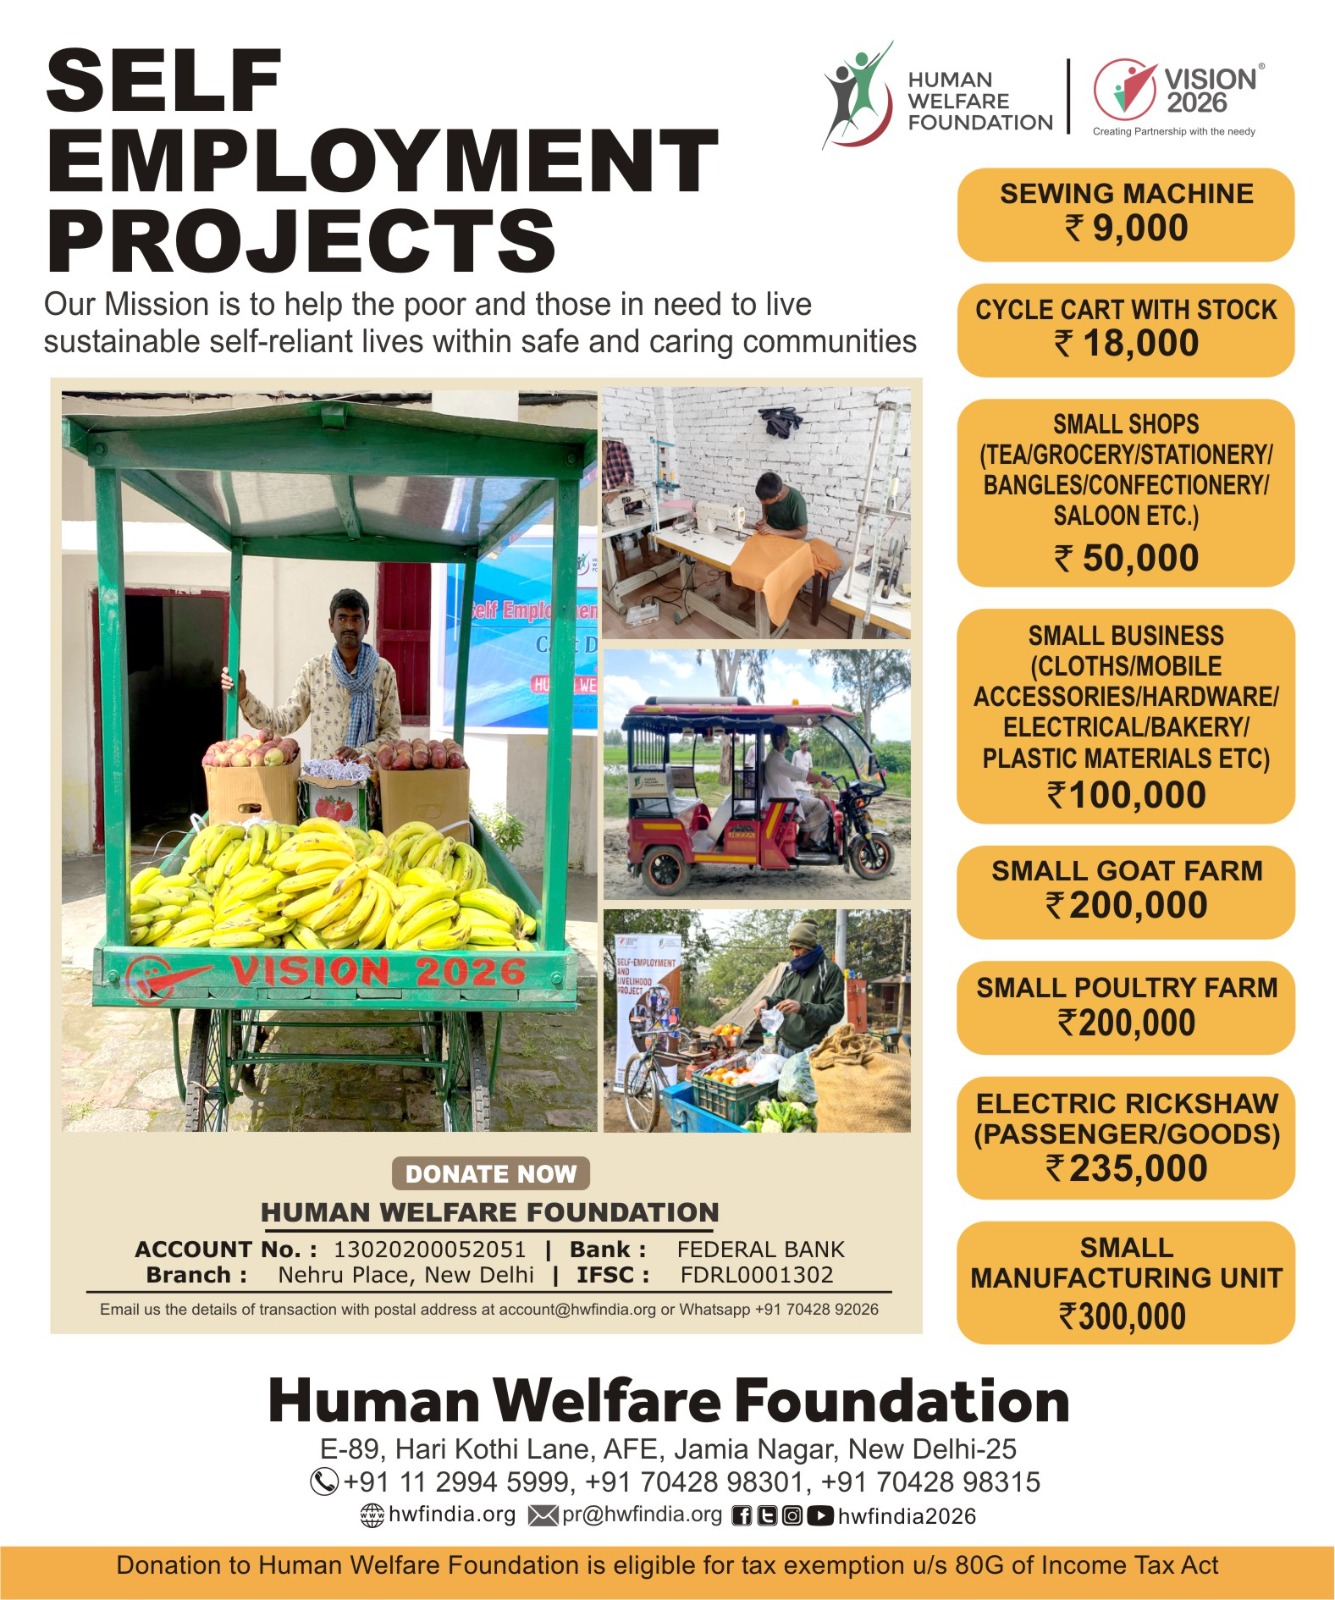 Self Employment Projects